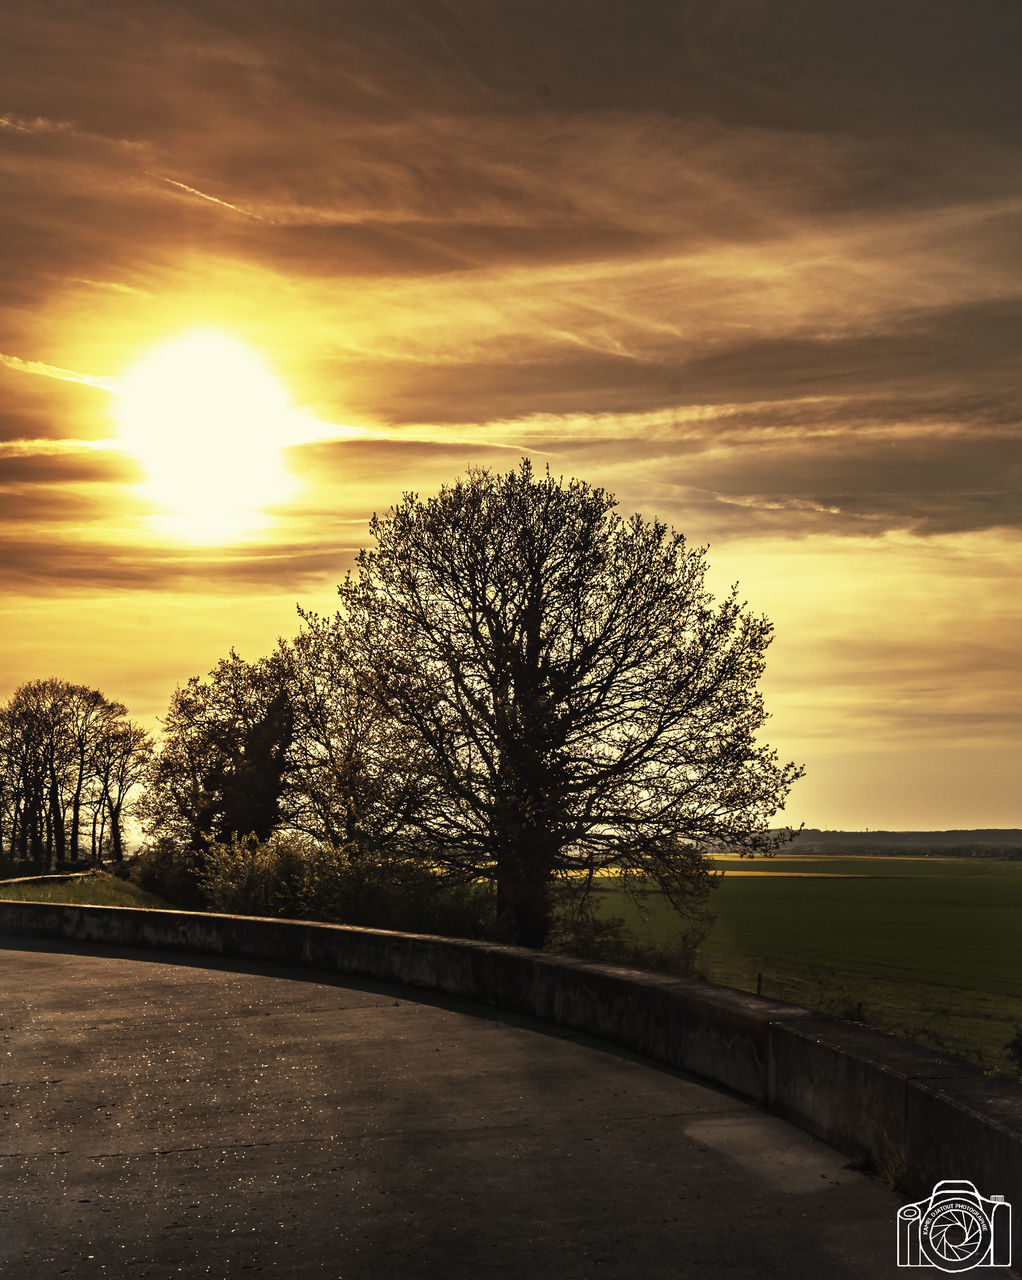 sky, sunset, tree, cloud - sky, plant, beauty in nature, nature, scenics - nature, bare tree, sun, no people, orange color, tranquility, tranquil scene, transportation, road, sunlight, outdoors, the way forward, field